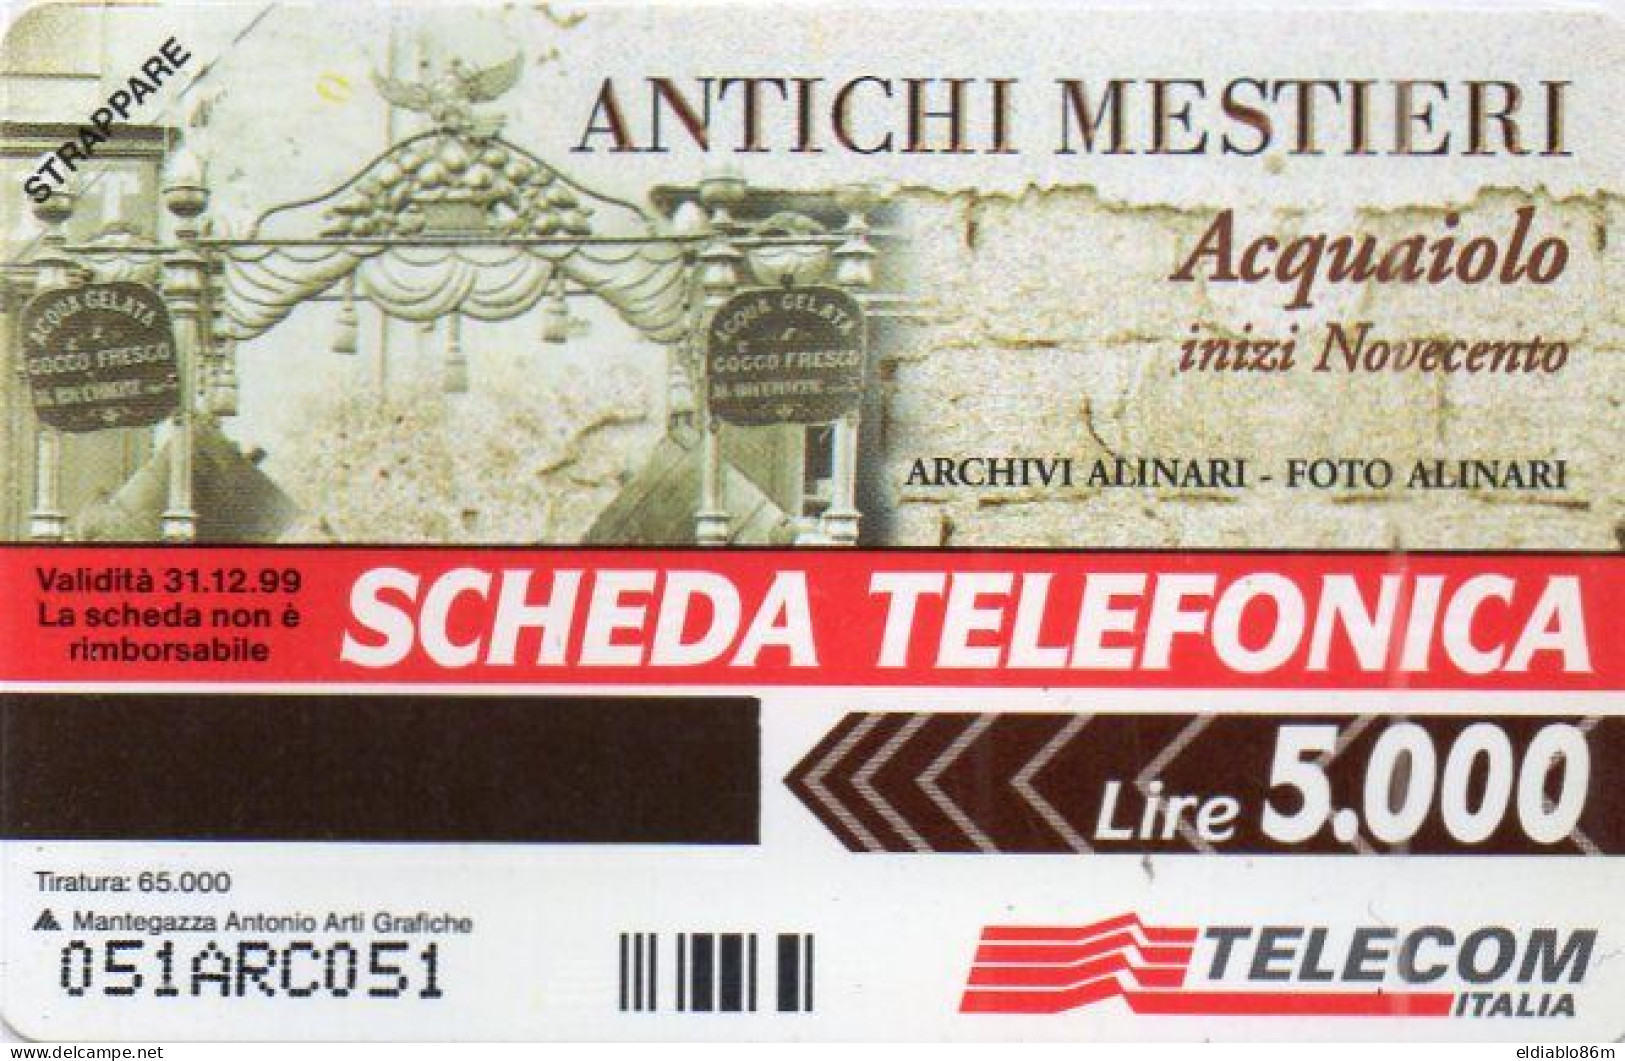 ITALY - URMET - ARC CARD (FOR INTERNAL TELECOM ARCHIVES) - SEE BATCH NUMBER - 200ex - MINT - Tests & Service